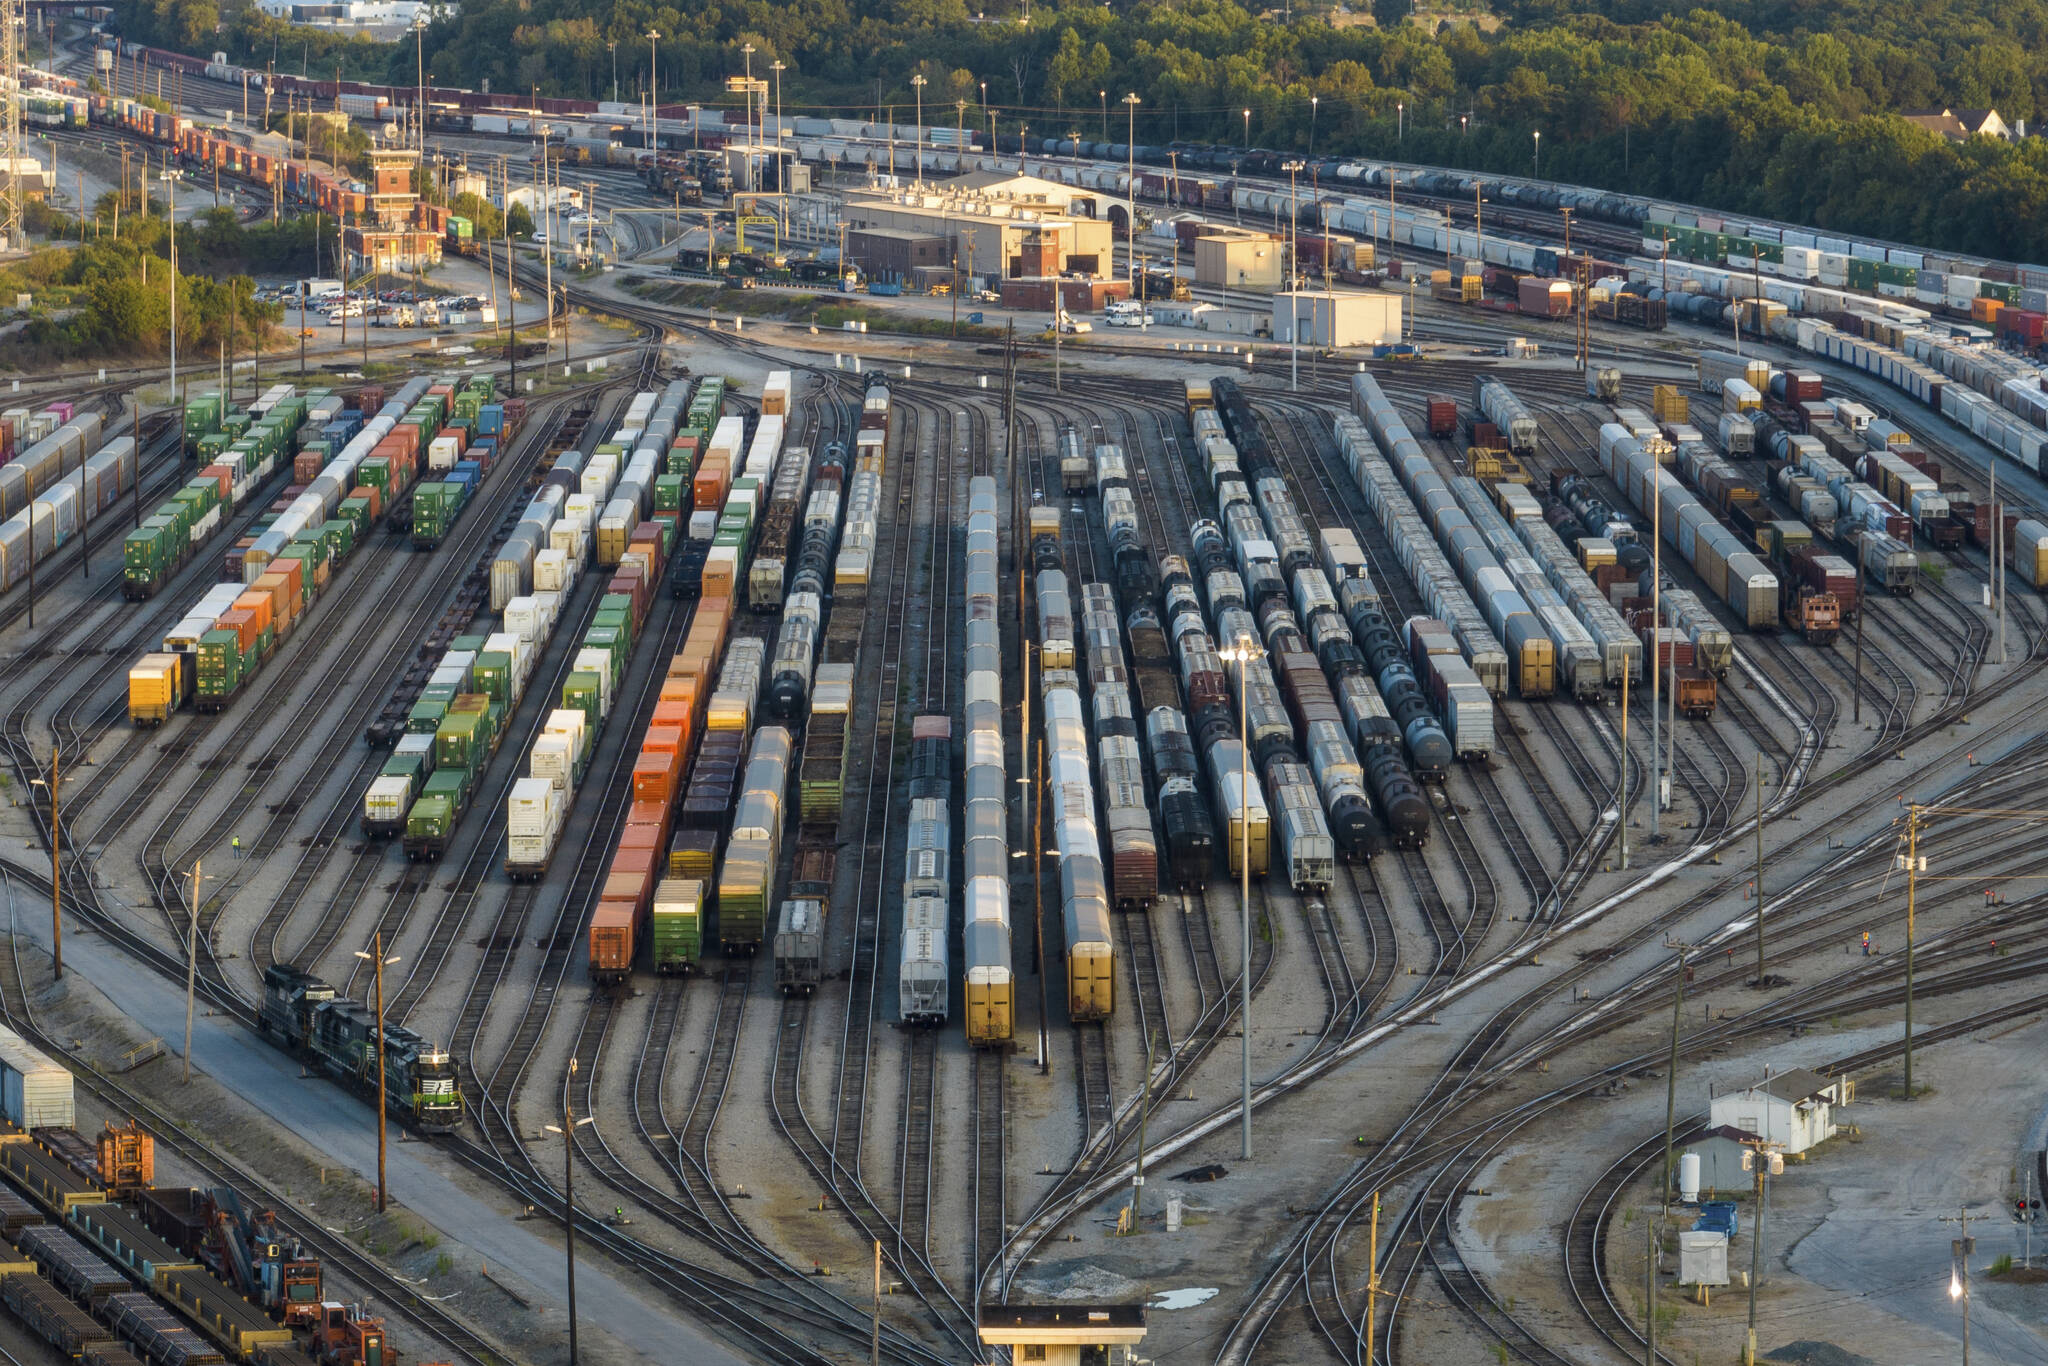 FILE - Freight train cars sit in a Norfolk Southern rail yard on Sept. 14, 2022, in Atlanta. The Biden administration is saying the U.S. economy would face a severe economic shock if senators don't pass legislation this week to avert a rail worker strike. The administration is delivering that message personally to Democratic senators in a closed-door session Thursday, Dec. 1.  (AP Photo / Danny Karnik)